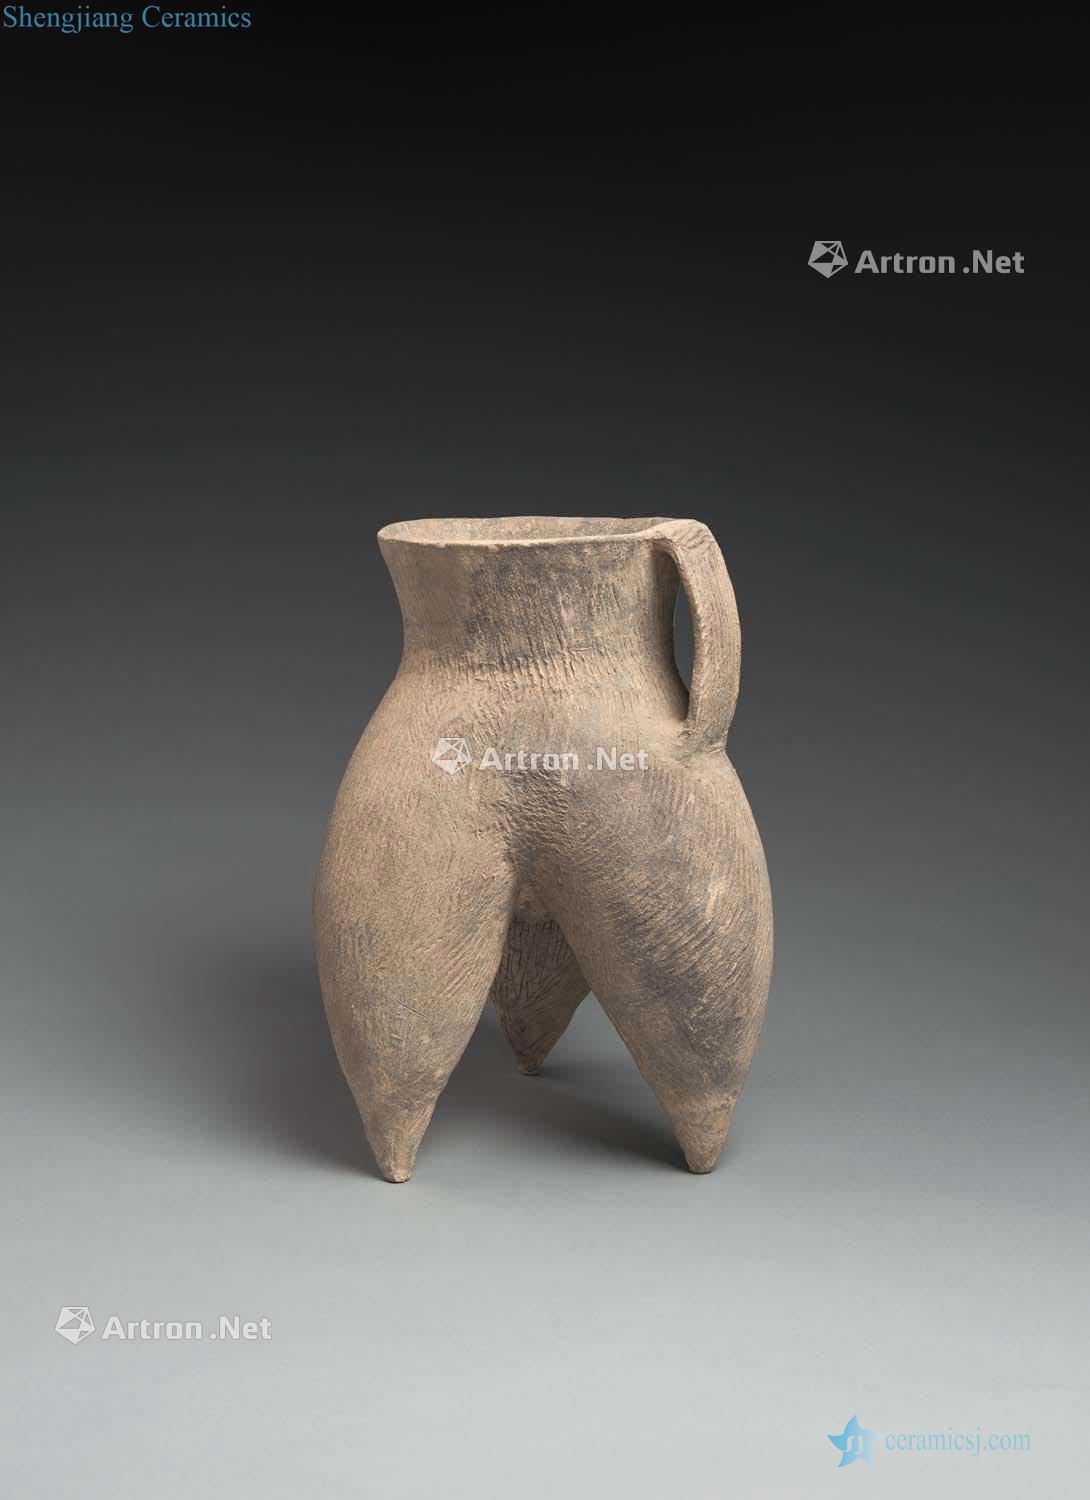 neolithic Tao jia in three thousand BC